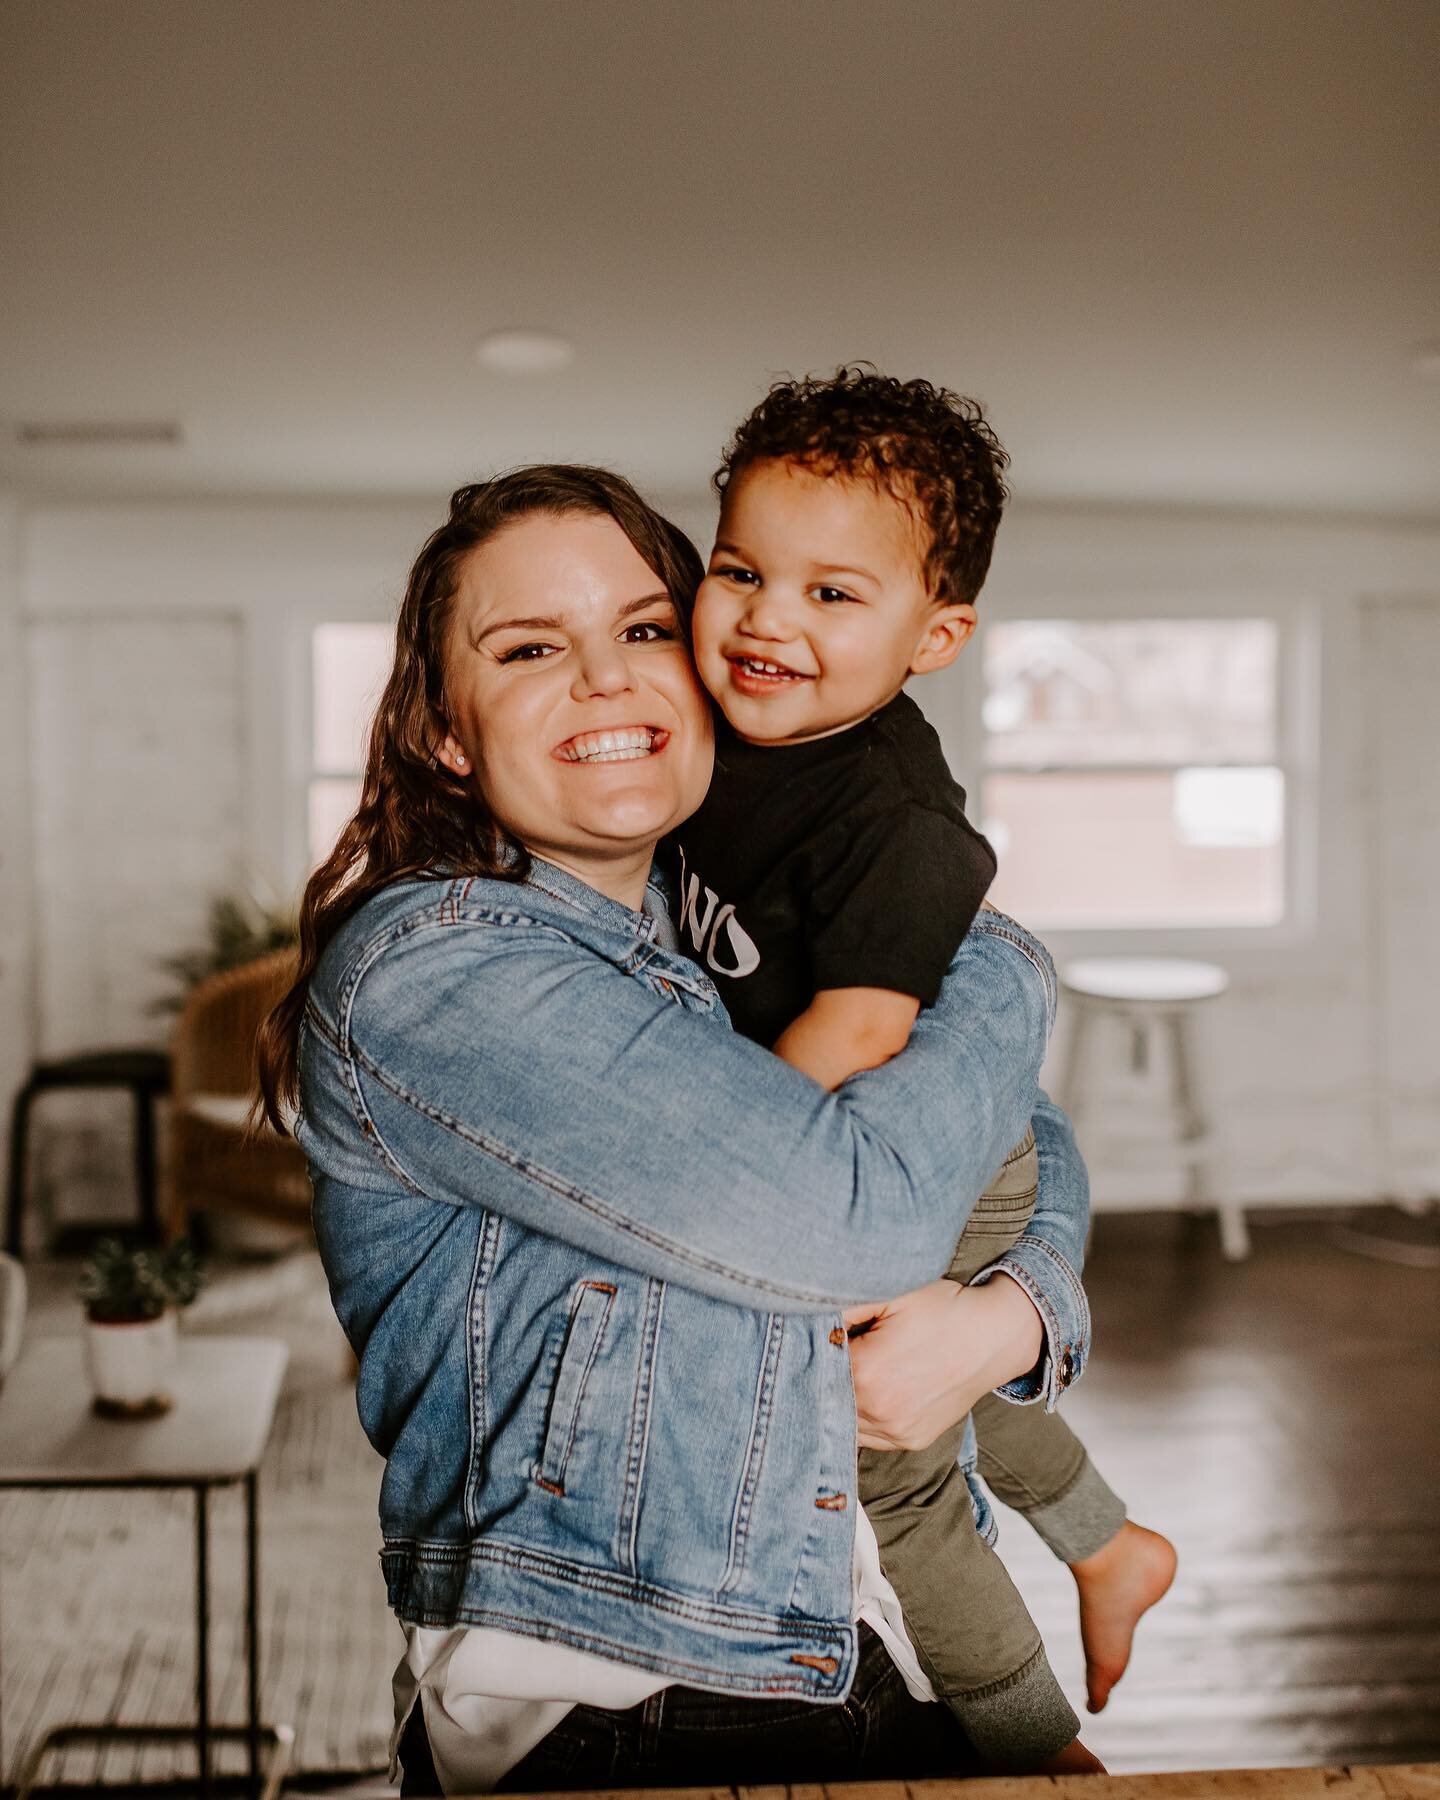 Yesterday was my sons second birthday and I absolutely love being able to look at how much he's grown over the past two years. In 2 years, we've had our pictures taken by @mkf.photo FIVE times!!

Our first shoot with Mac literally feels like yesterda